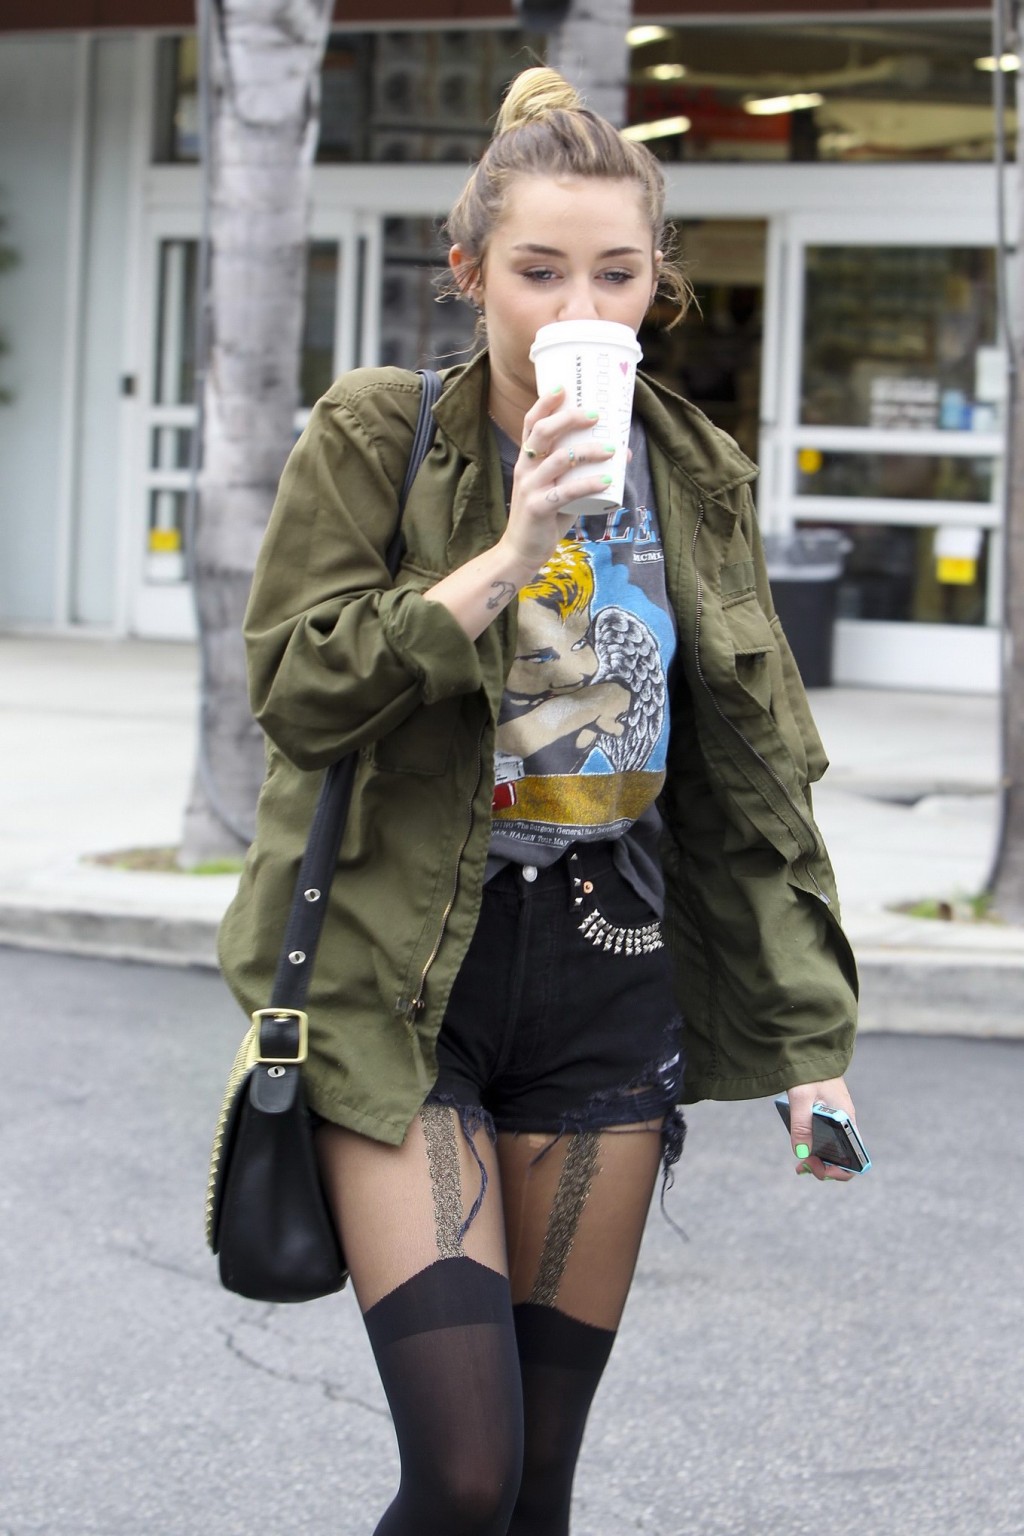 Miley Cyrus leggy wearing stockings  biker boots outside Starbucks in Hollywood #75274243